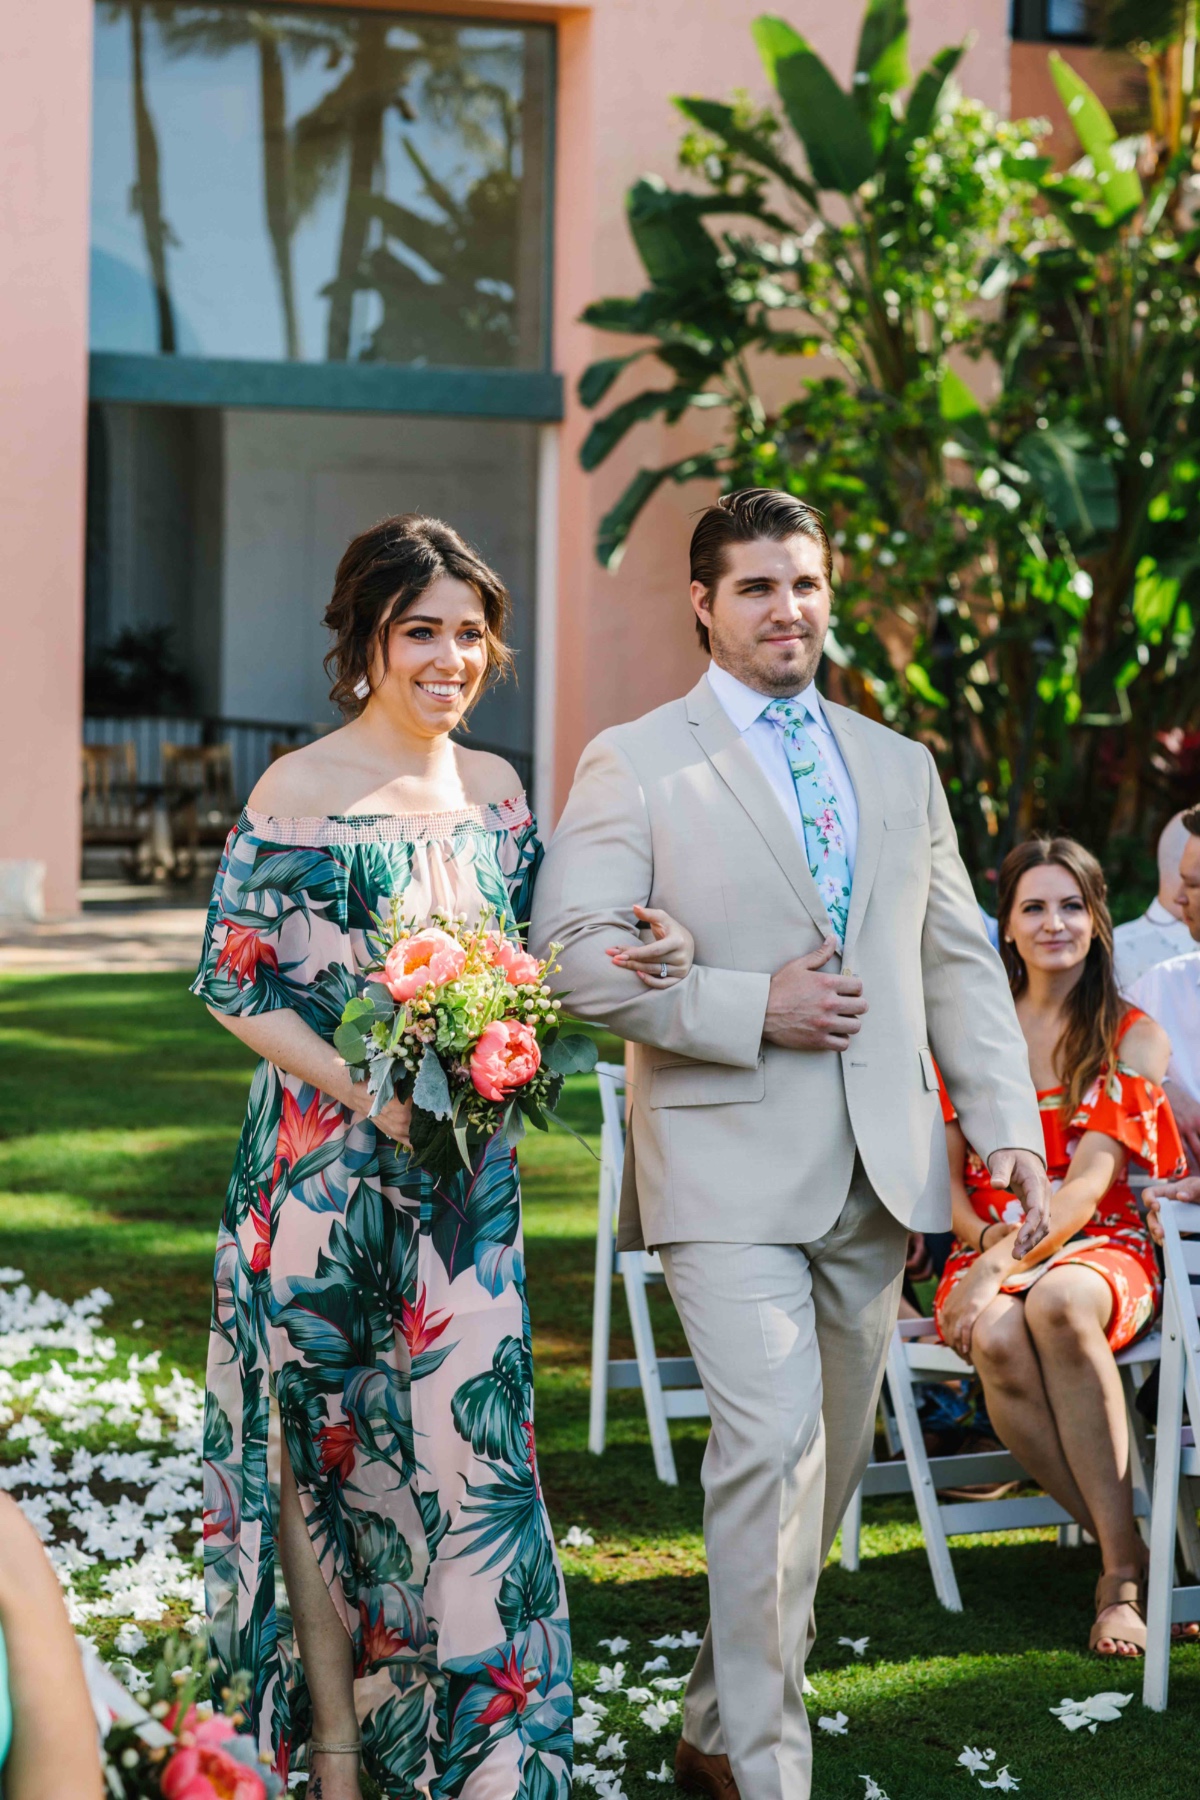 It's My Wedding Day Beaches! A Tropical Boho Wedding at the Iconic Pink Hotel of Waikiki.